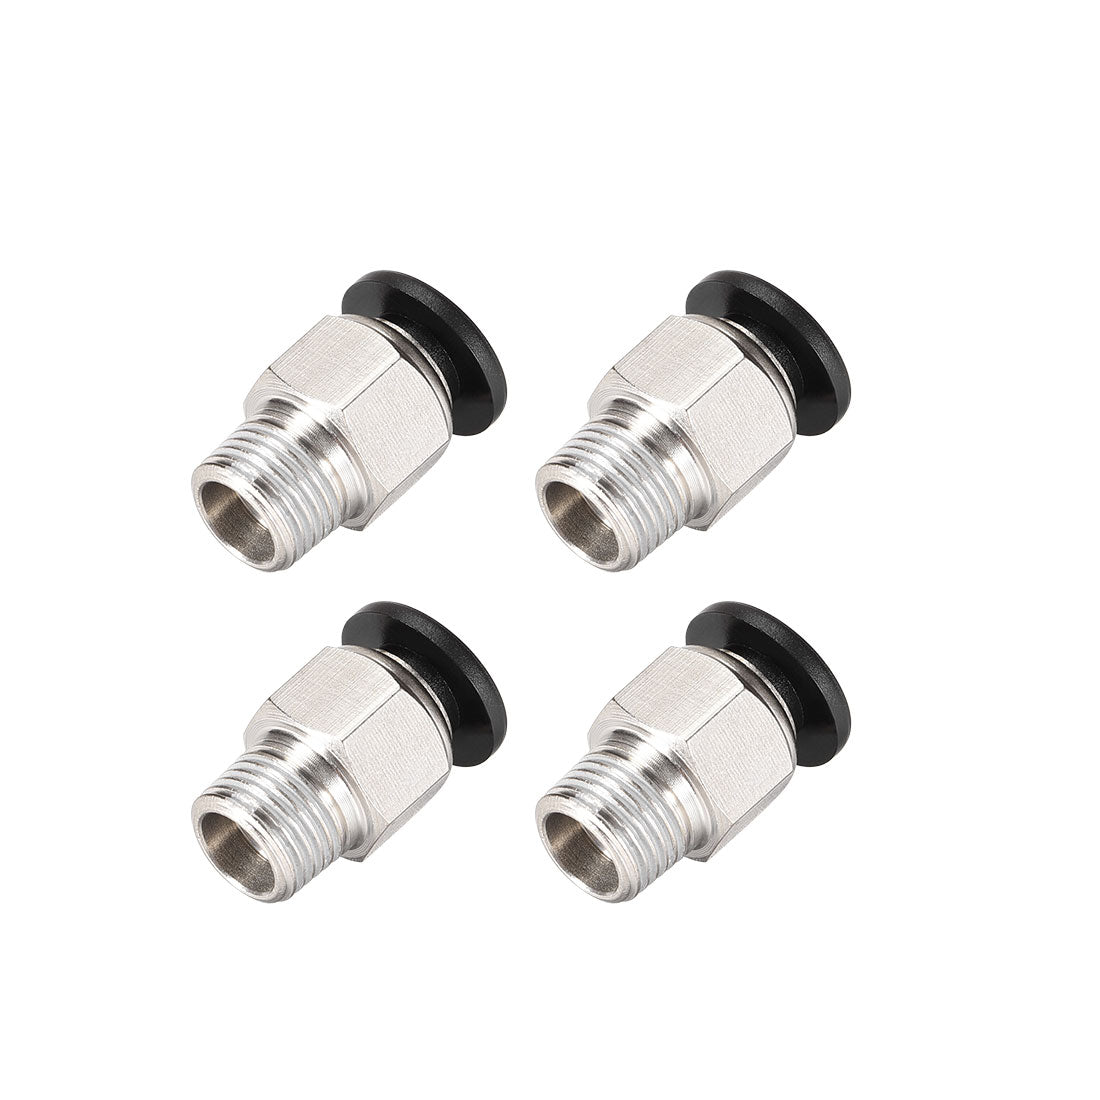 uxcell Uxcell Straight Pneumatic Push to Quick Connect Fittings 1/8NPT Male x 6mm Tube OD Silver Tone 4pcs